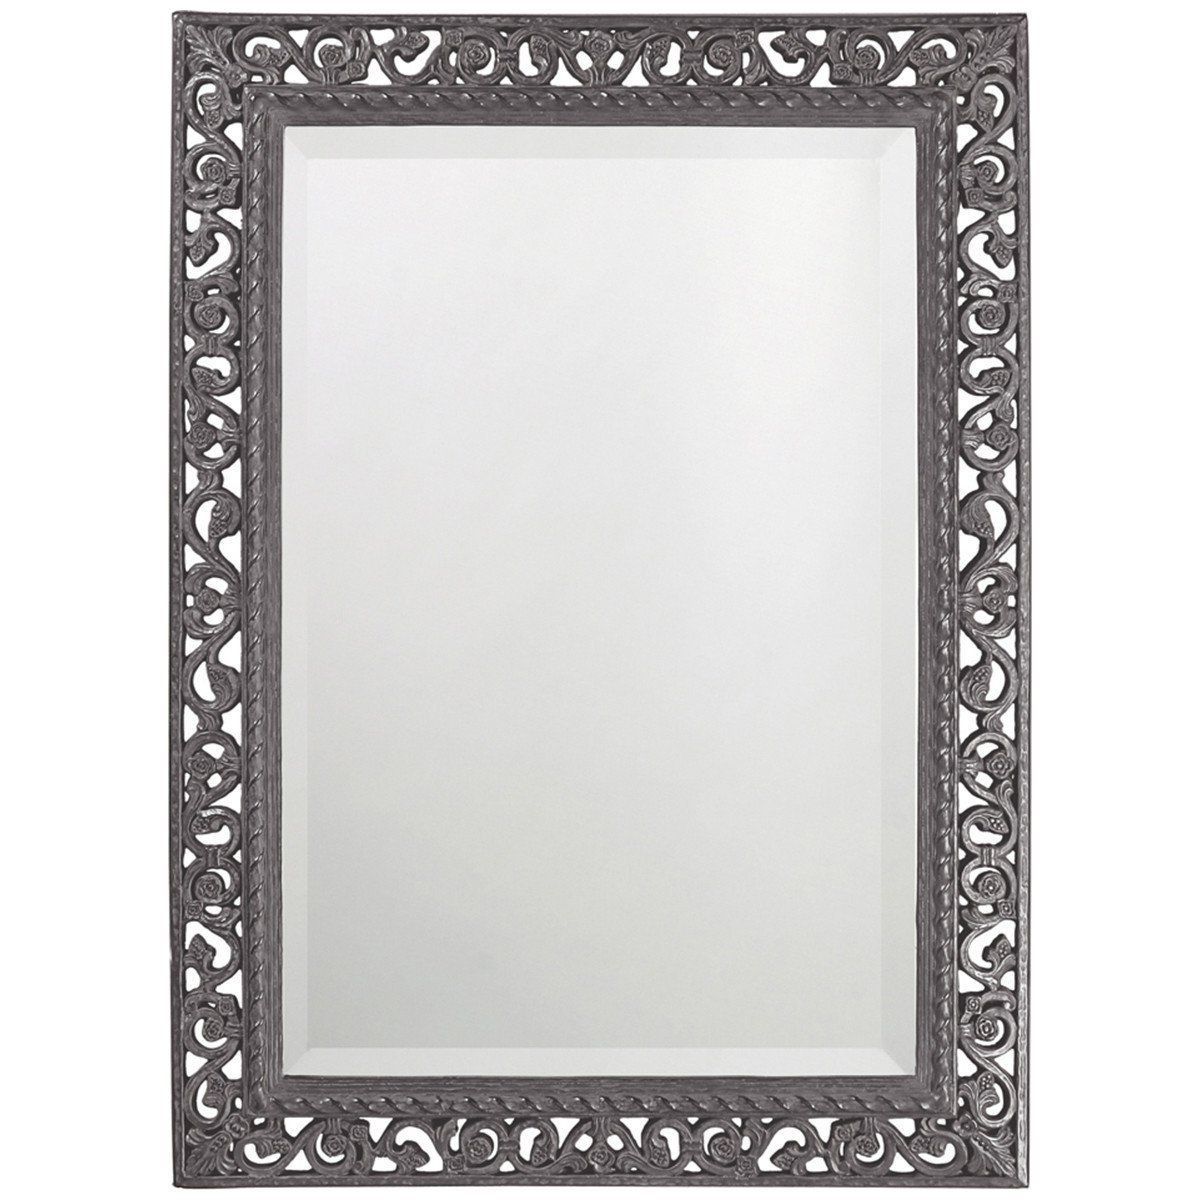 Bristol Accent Mirrors Throughout Preferred Howard Elliott Bristol Scroll Rectangle Mirror In  (View 11 of 20)